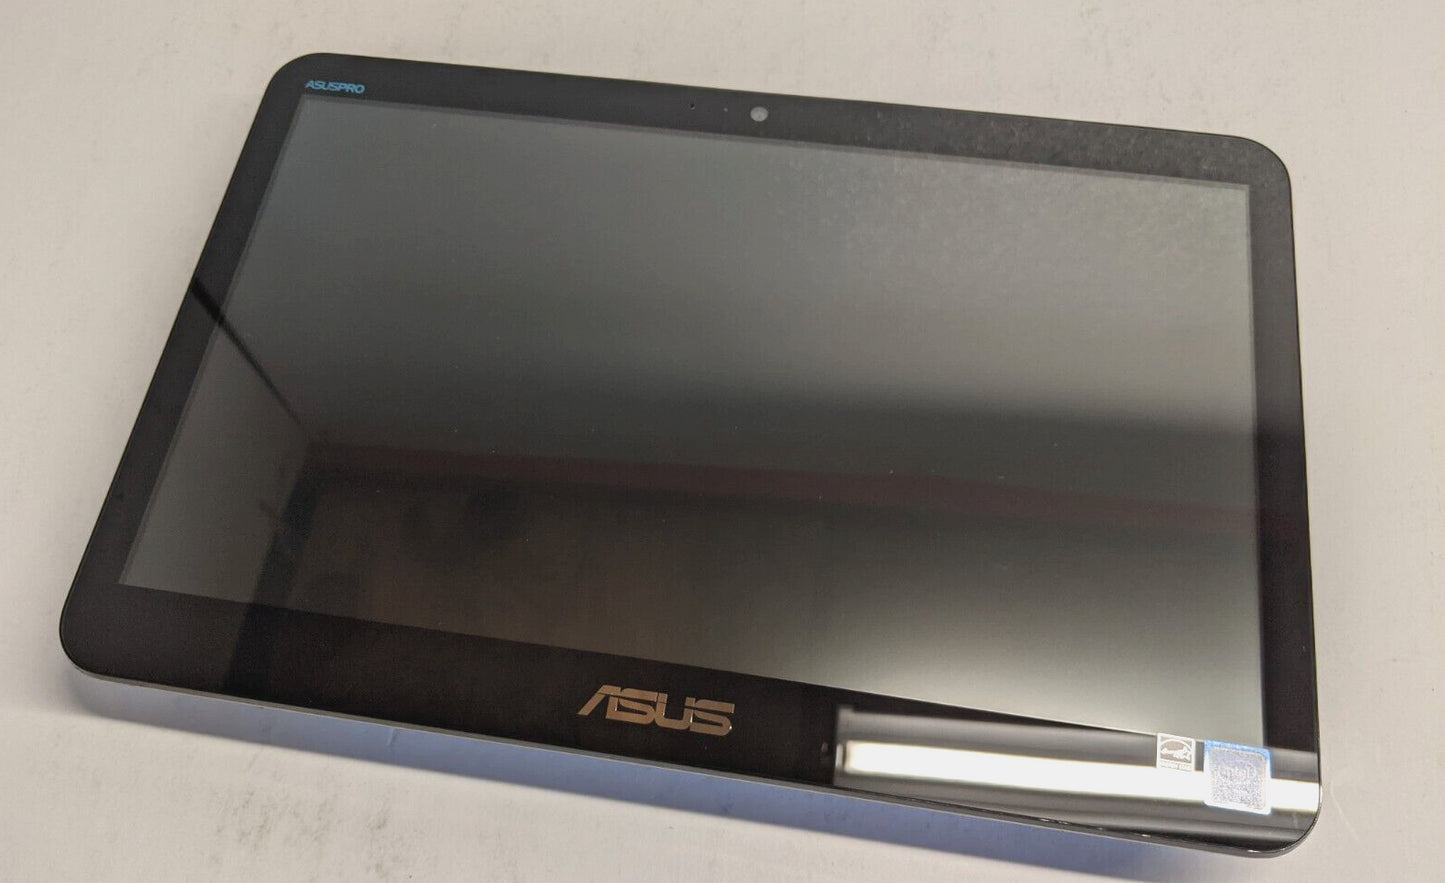 ASUS V161G A41 C-N4020 15.6" HD TOUCH AOI 4GB RAM 128 SSD